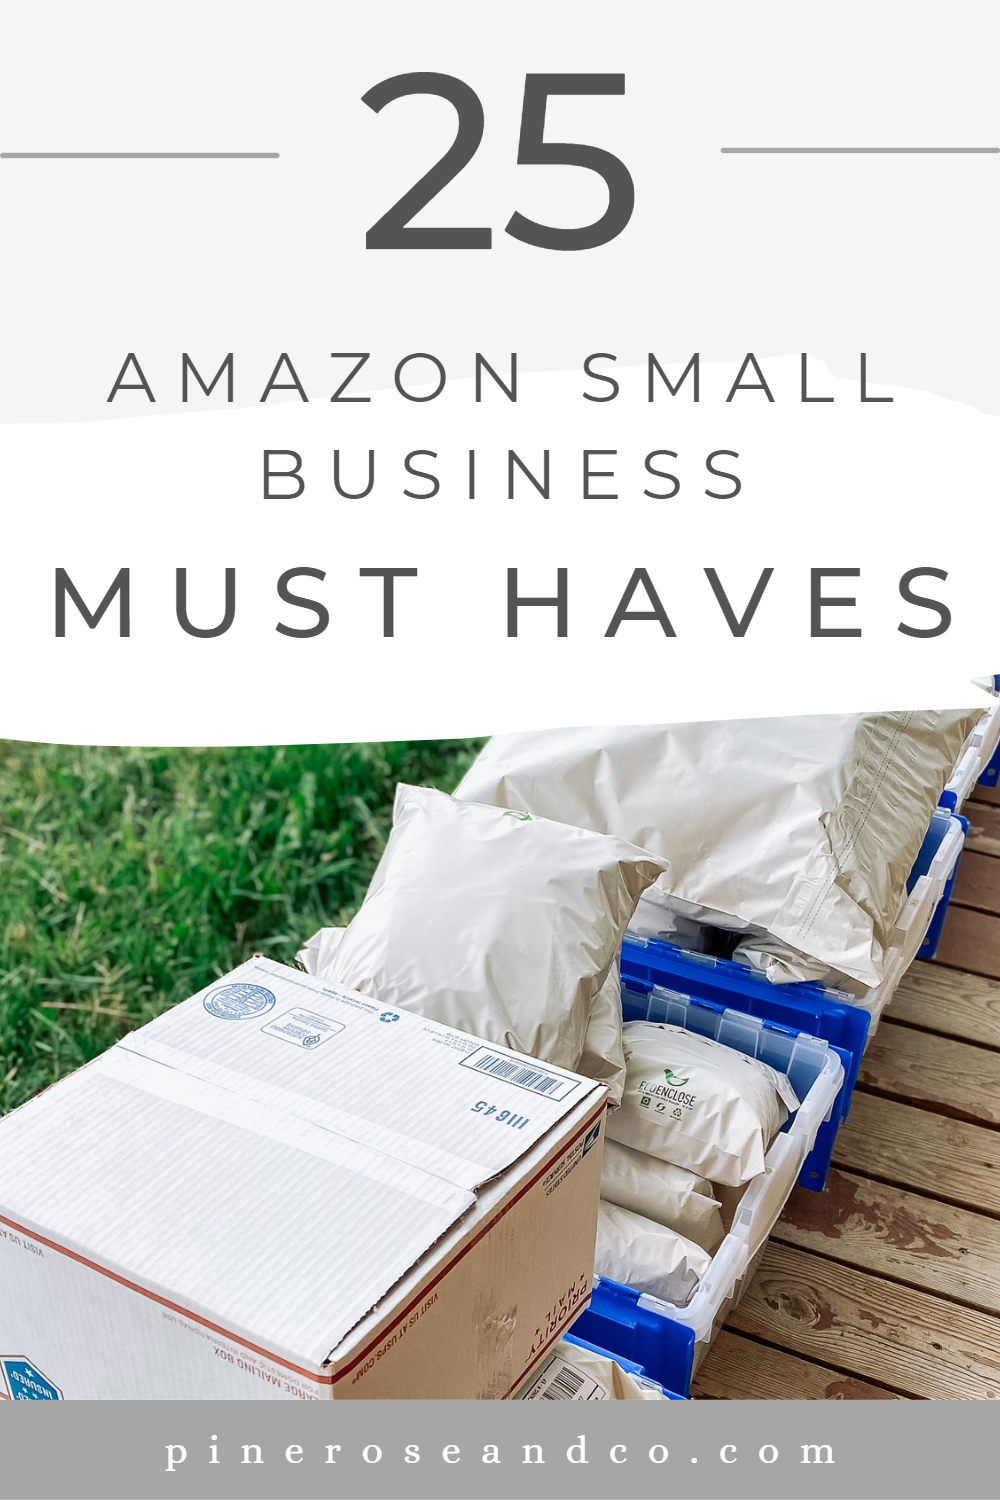 My Amazon Business Essentials and Favorites